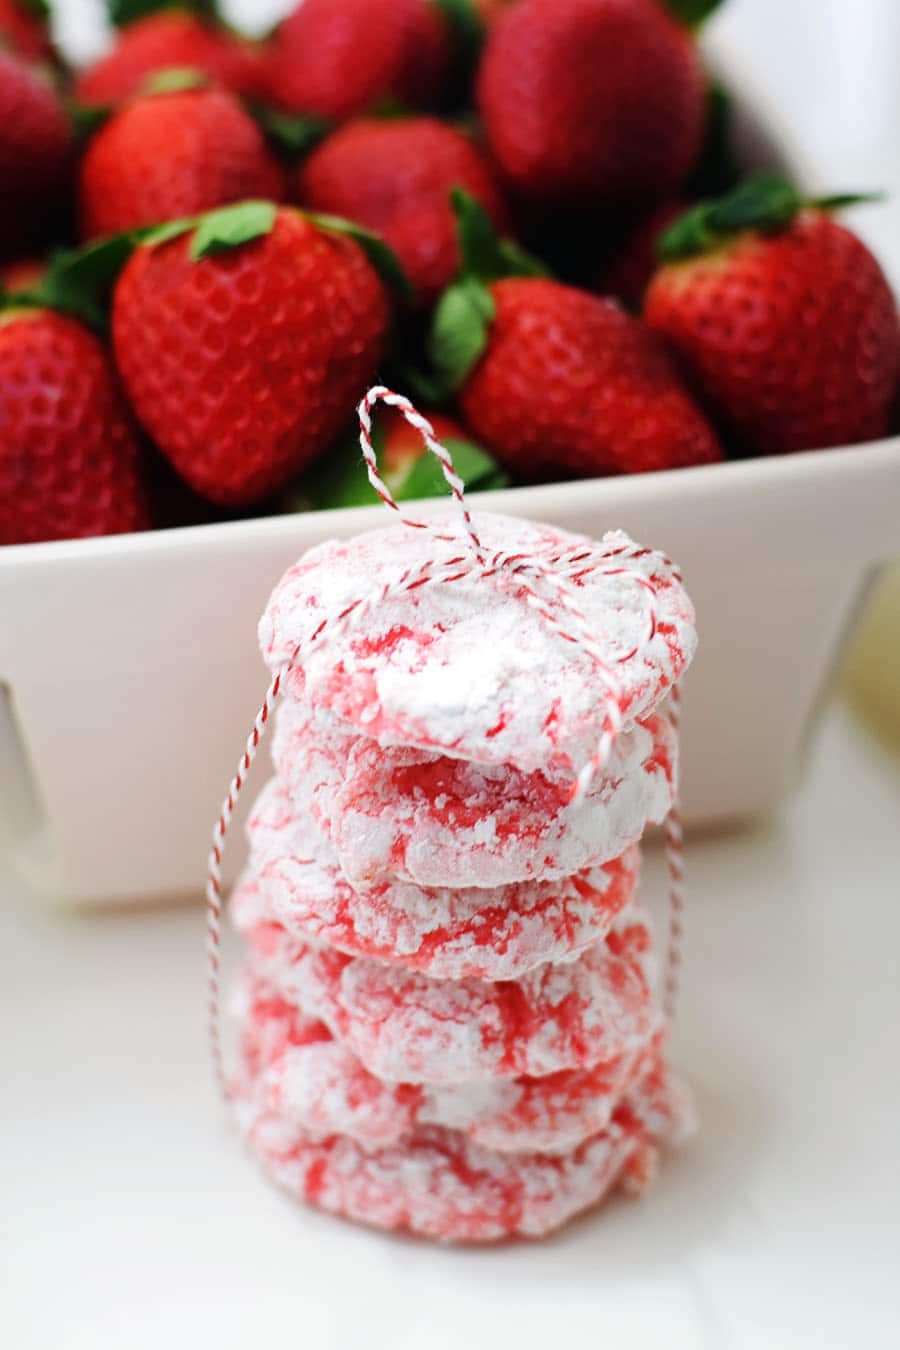 a stack of strawberry crinkle cookies tied together with red and white twine and a basket of fresh strawberries in the background